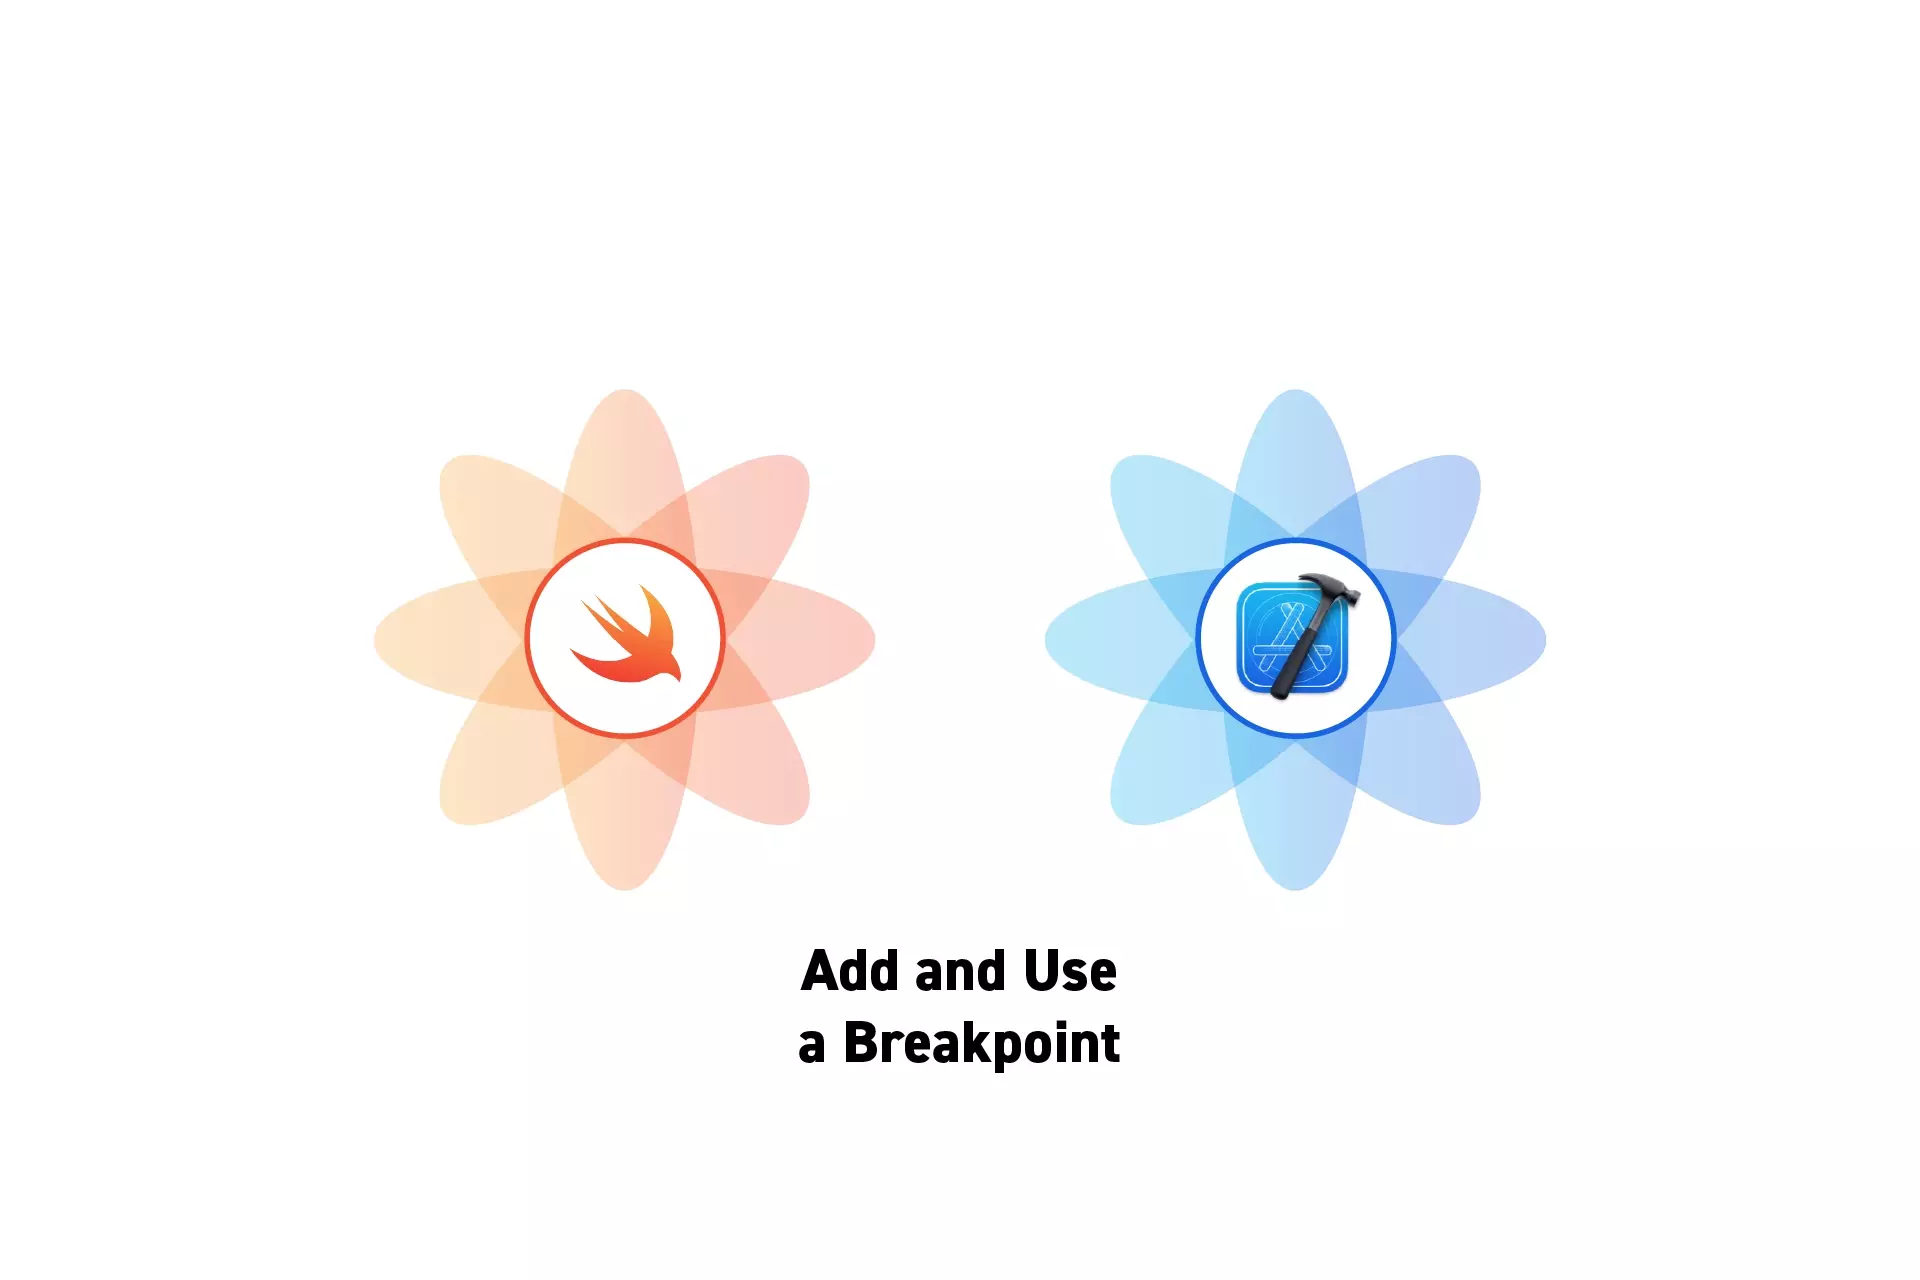 Two flowers that represent Swift and XCode side by side. Beneath them sits the text “Add and Use a Breakpoint”.